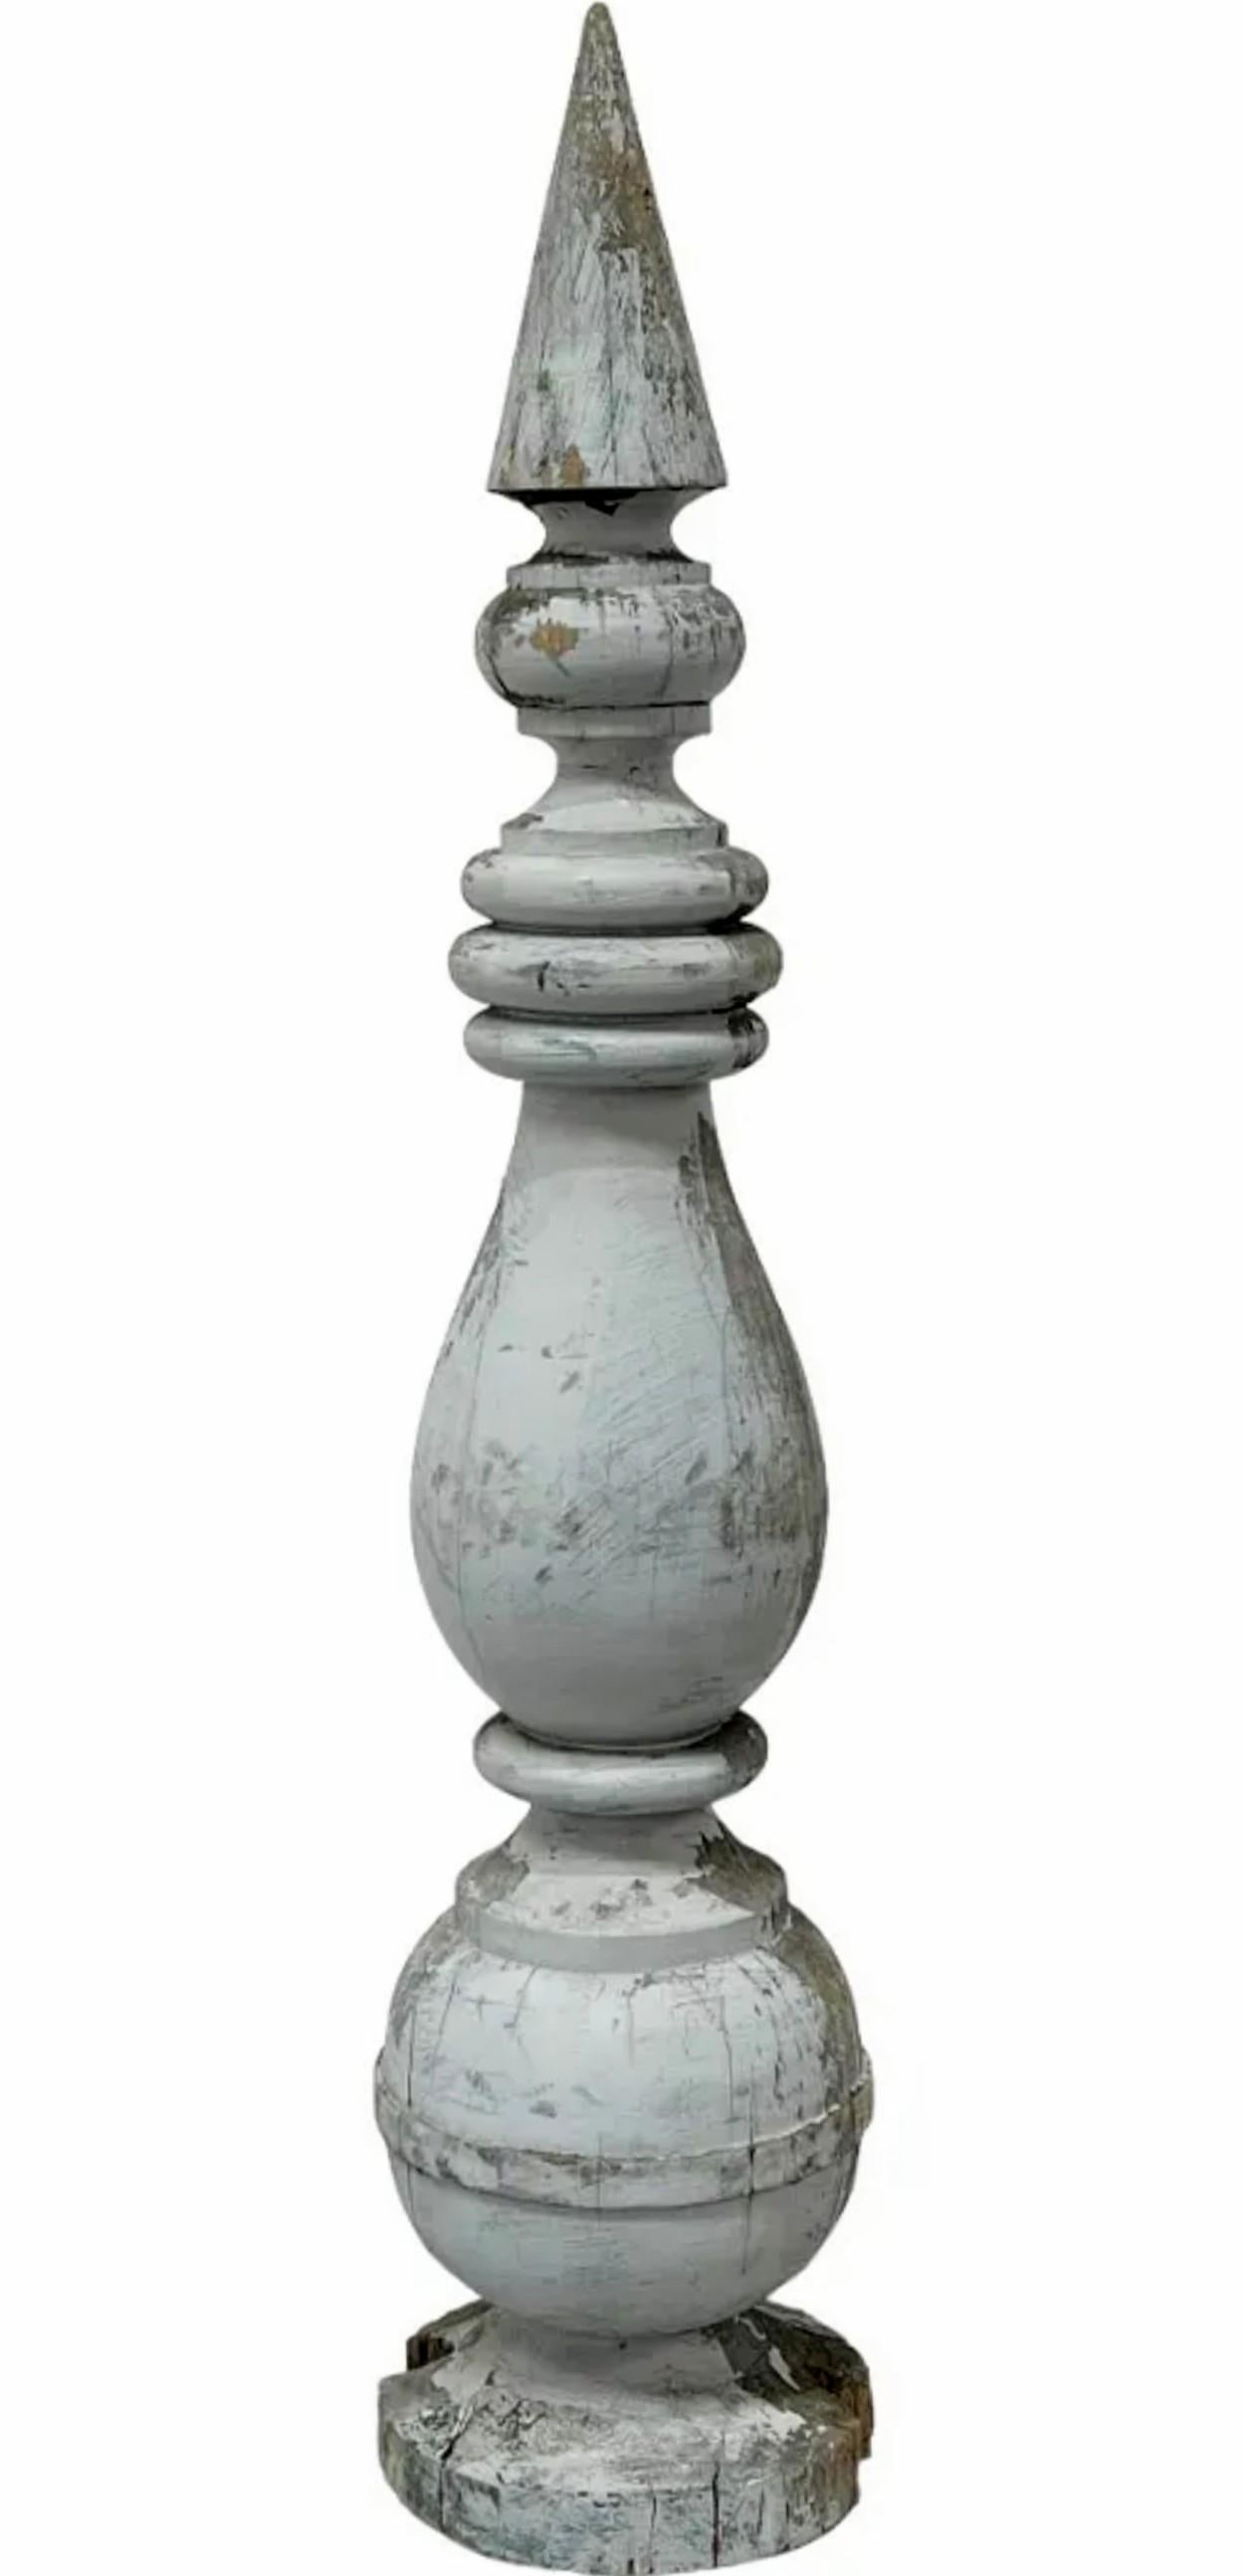 A large Victorian era architectural salvaged painted wood finial. 

The tall antique decorative building element from the 19th century features a sculptural tapered turned baluster-form bulbous solid wood column tower with conical shaped tip, in